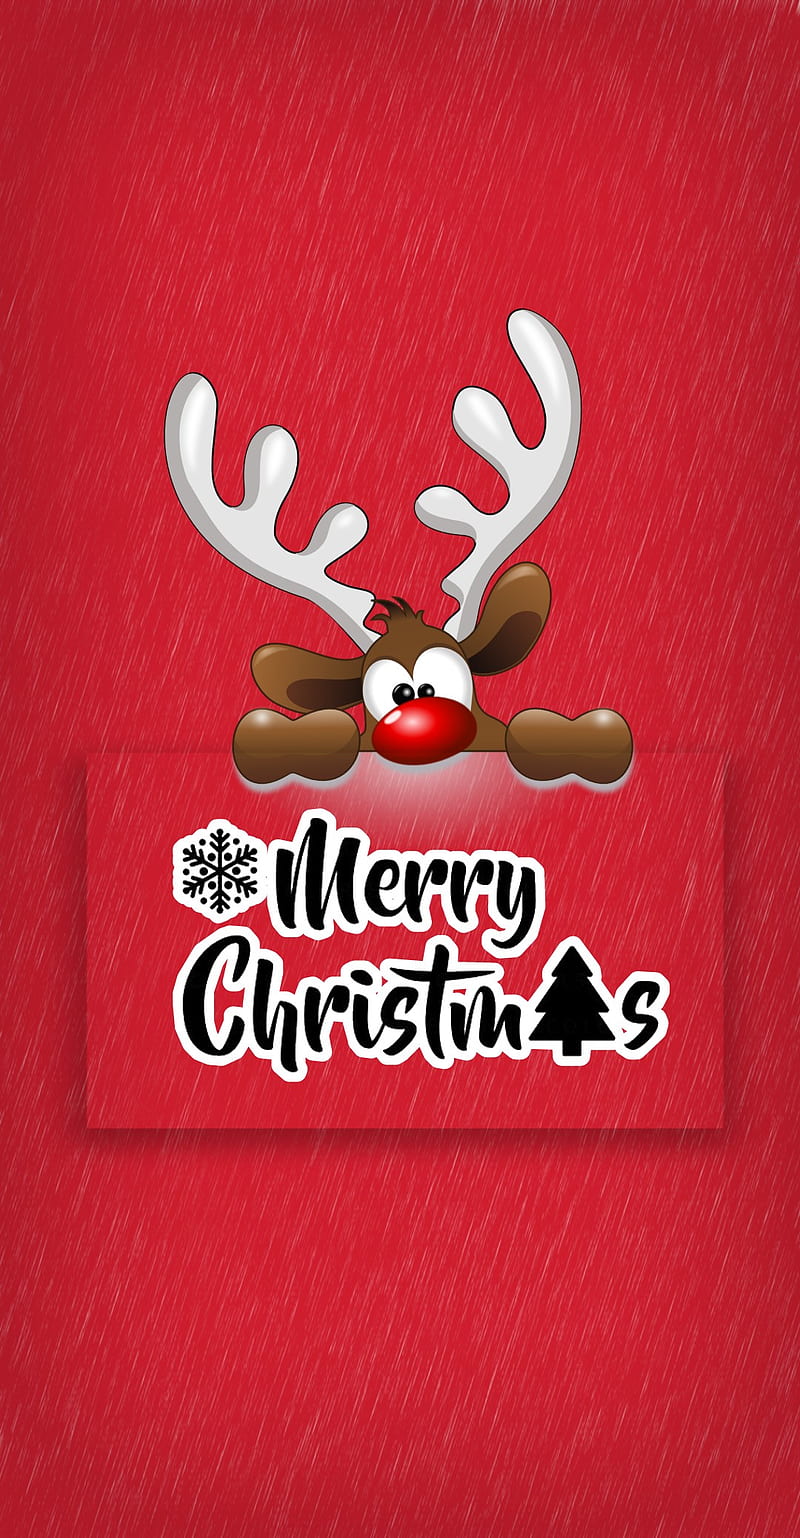 1920x1080px, 1080P free download | Merry Christmas, christmas, holiday